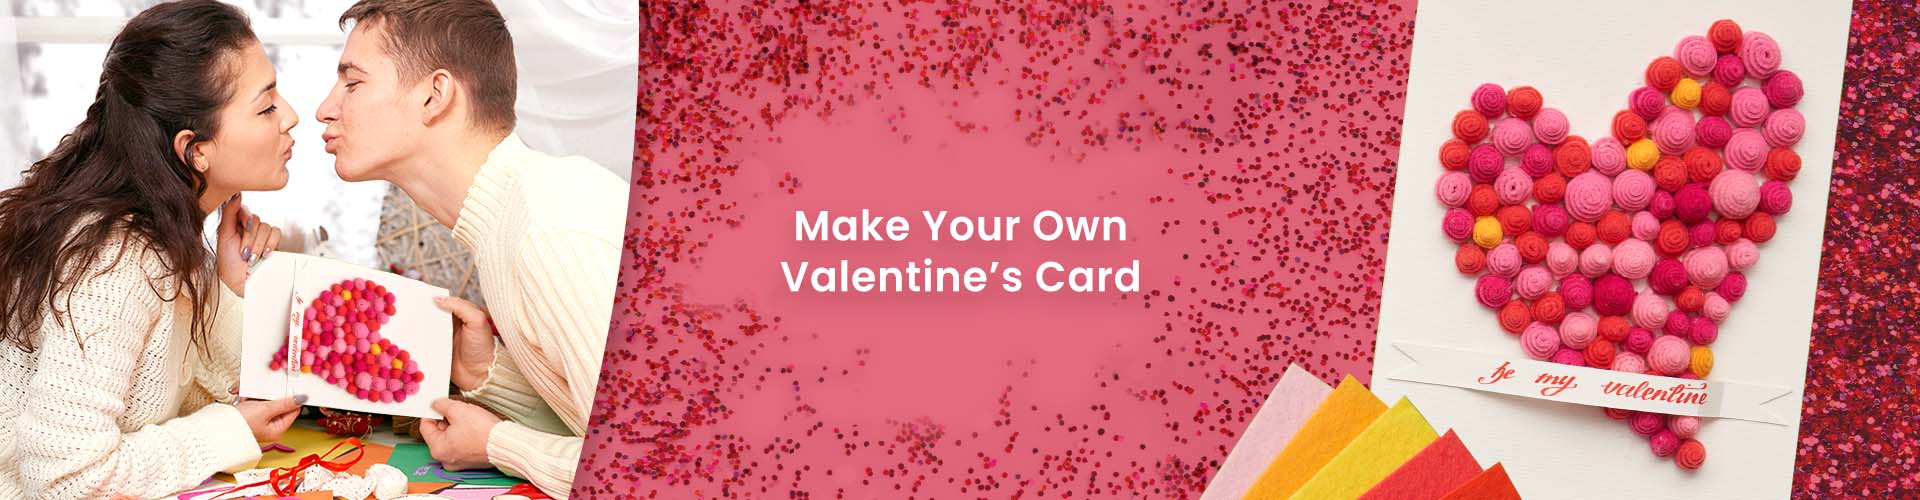 Make Your Own Valentine’s Card